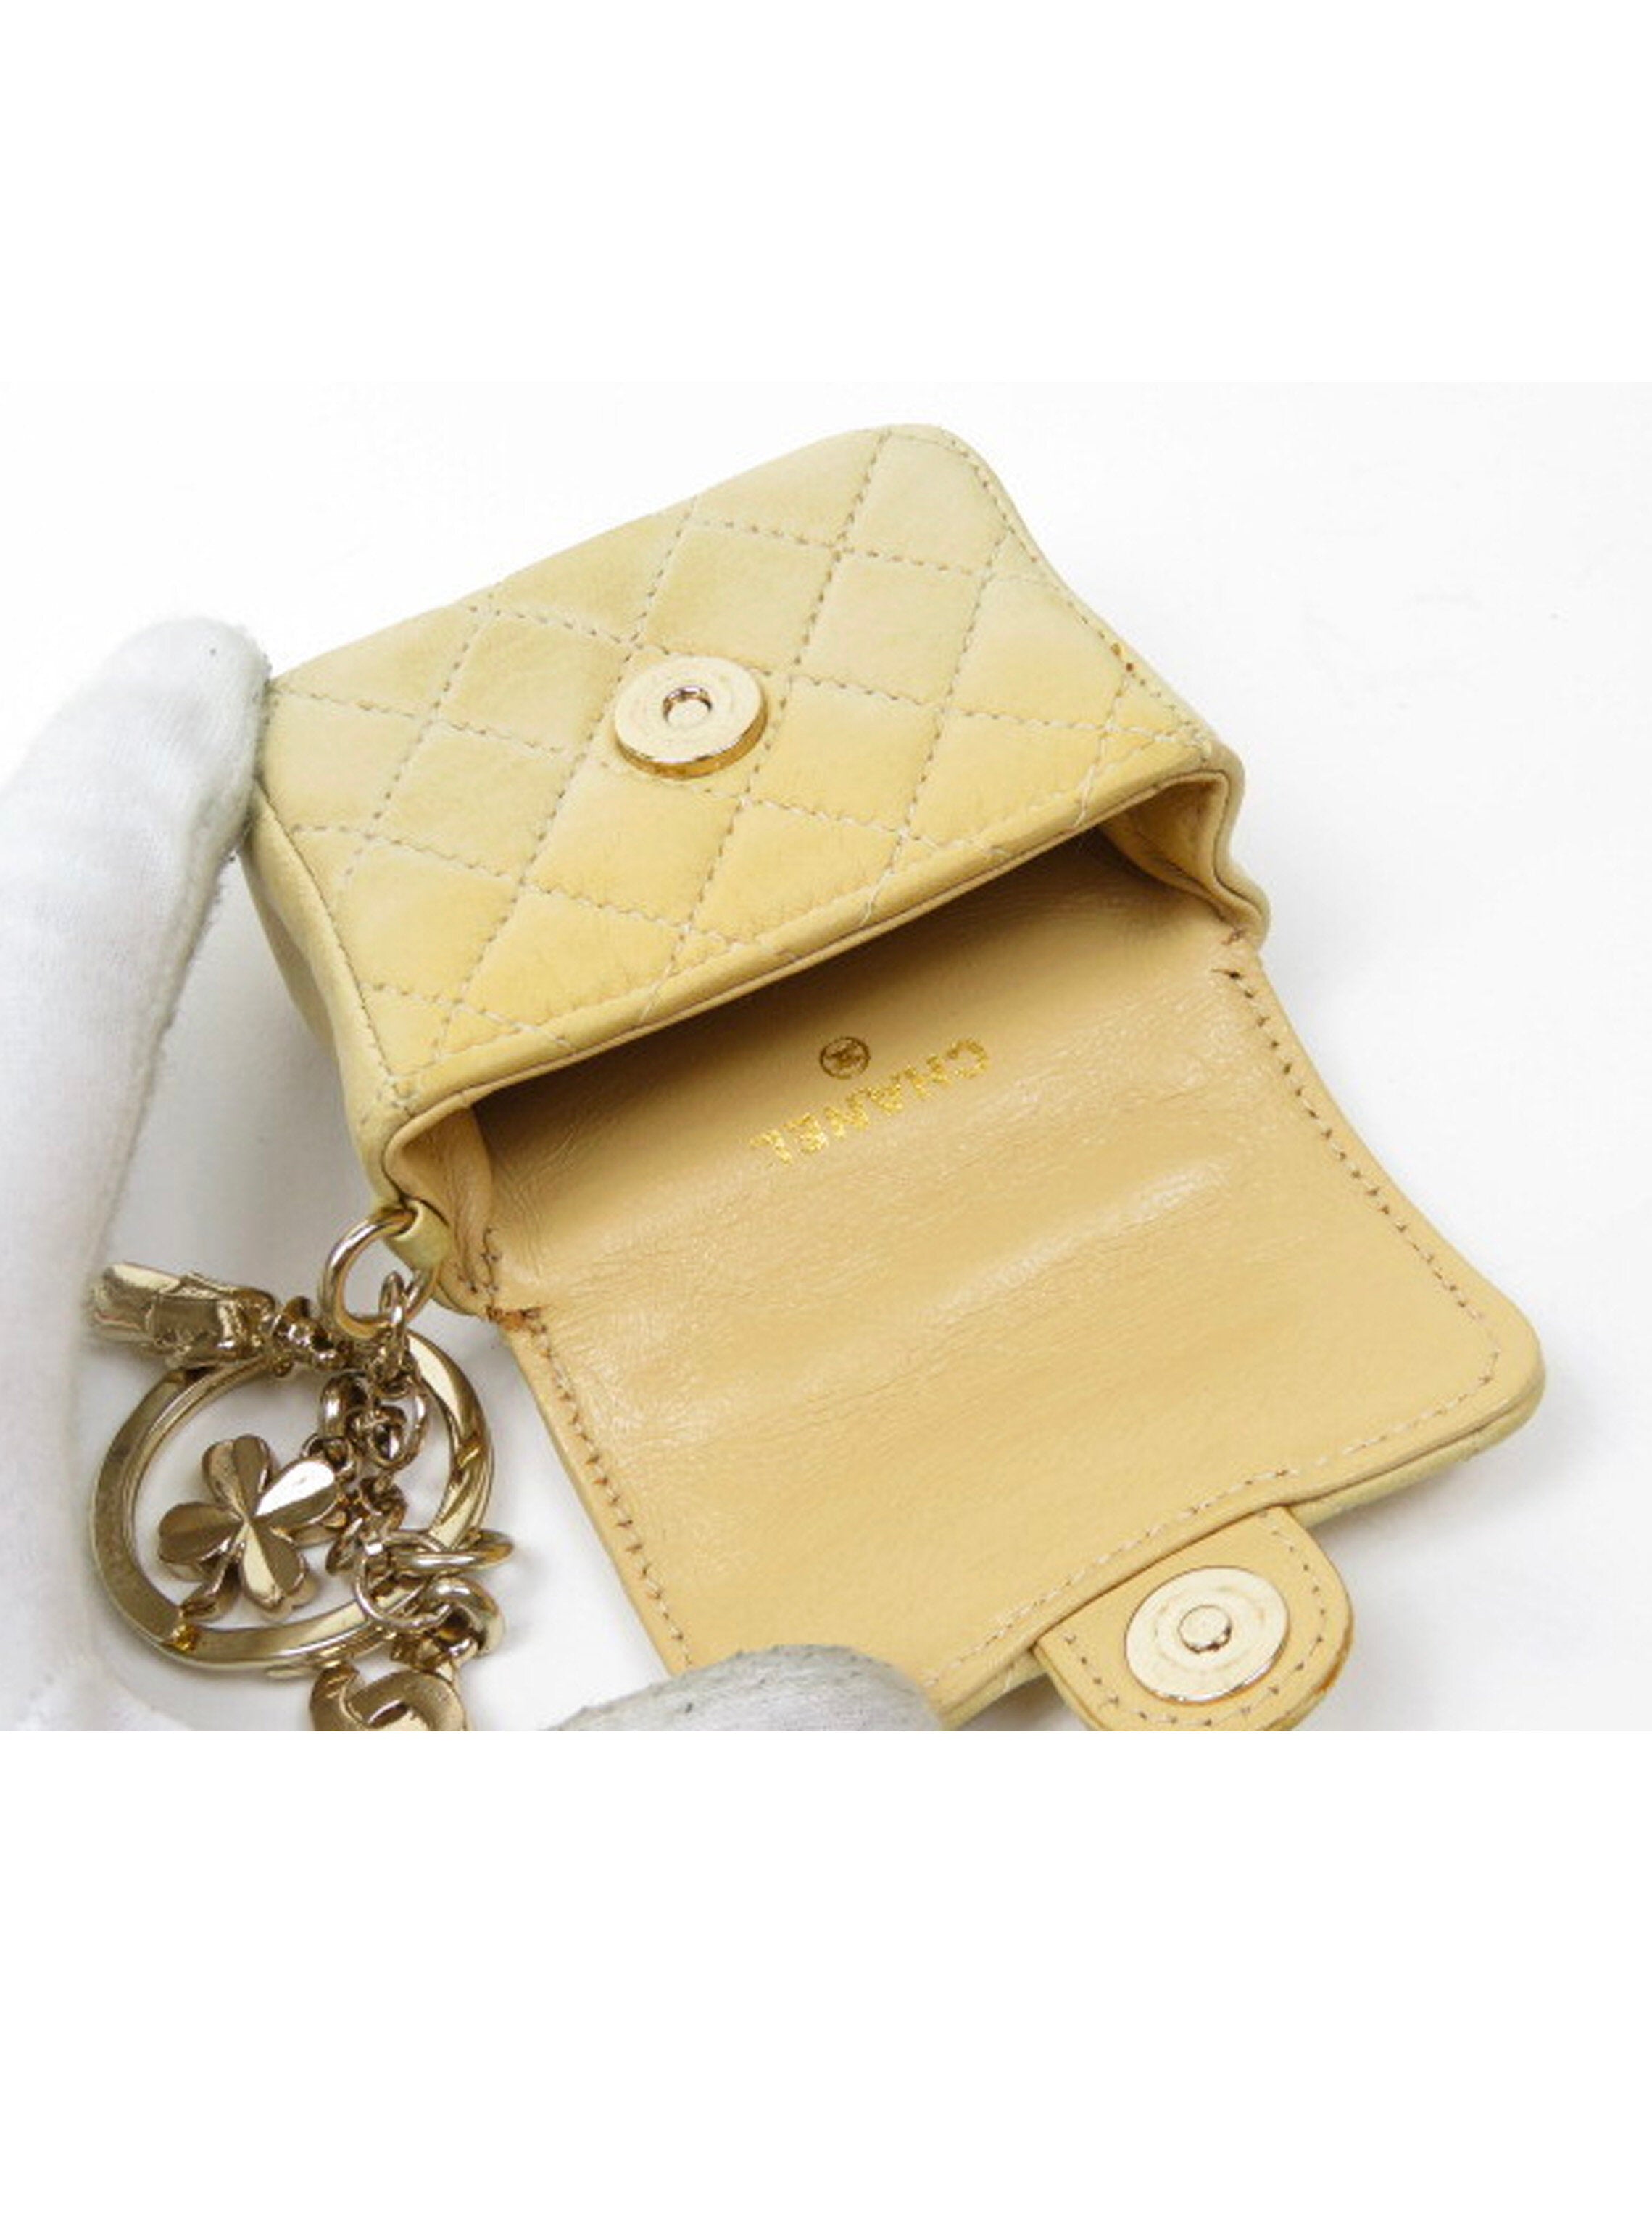 White Quilted Lambskin Micro Belt Bag Gold Hardware, 2002-2003